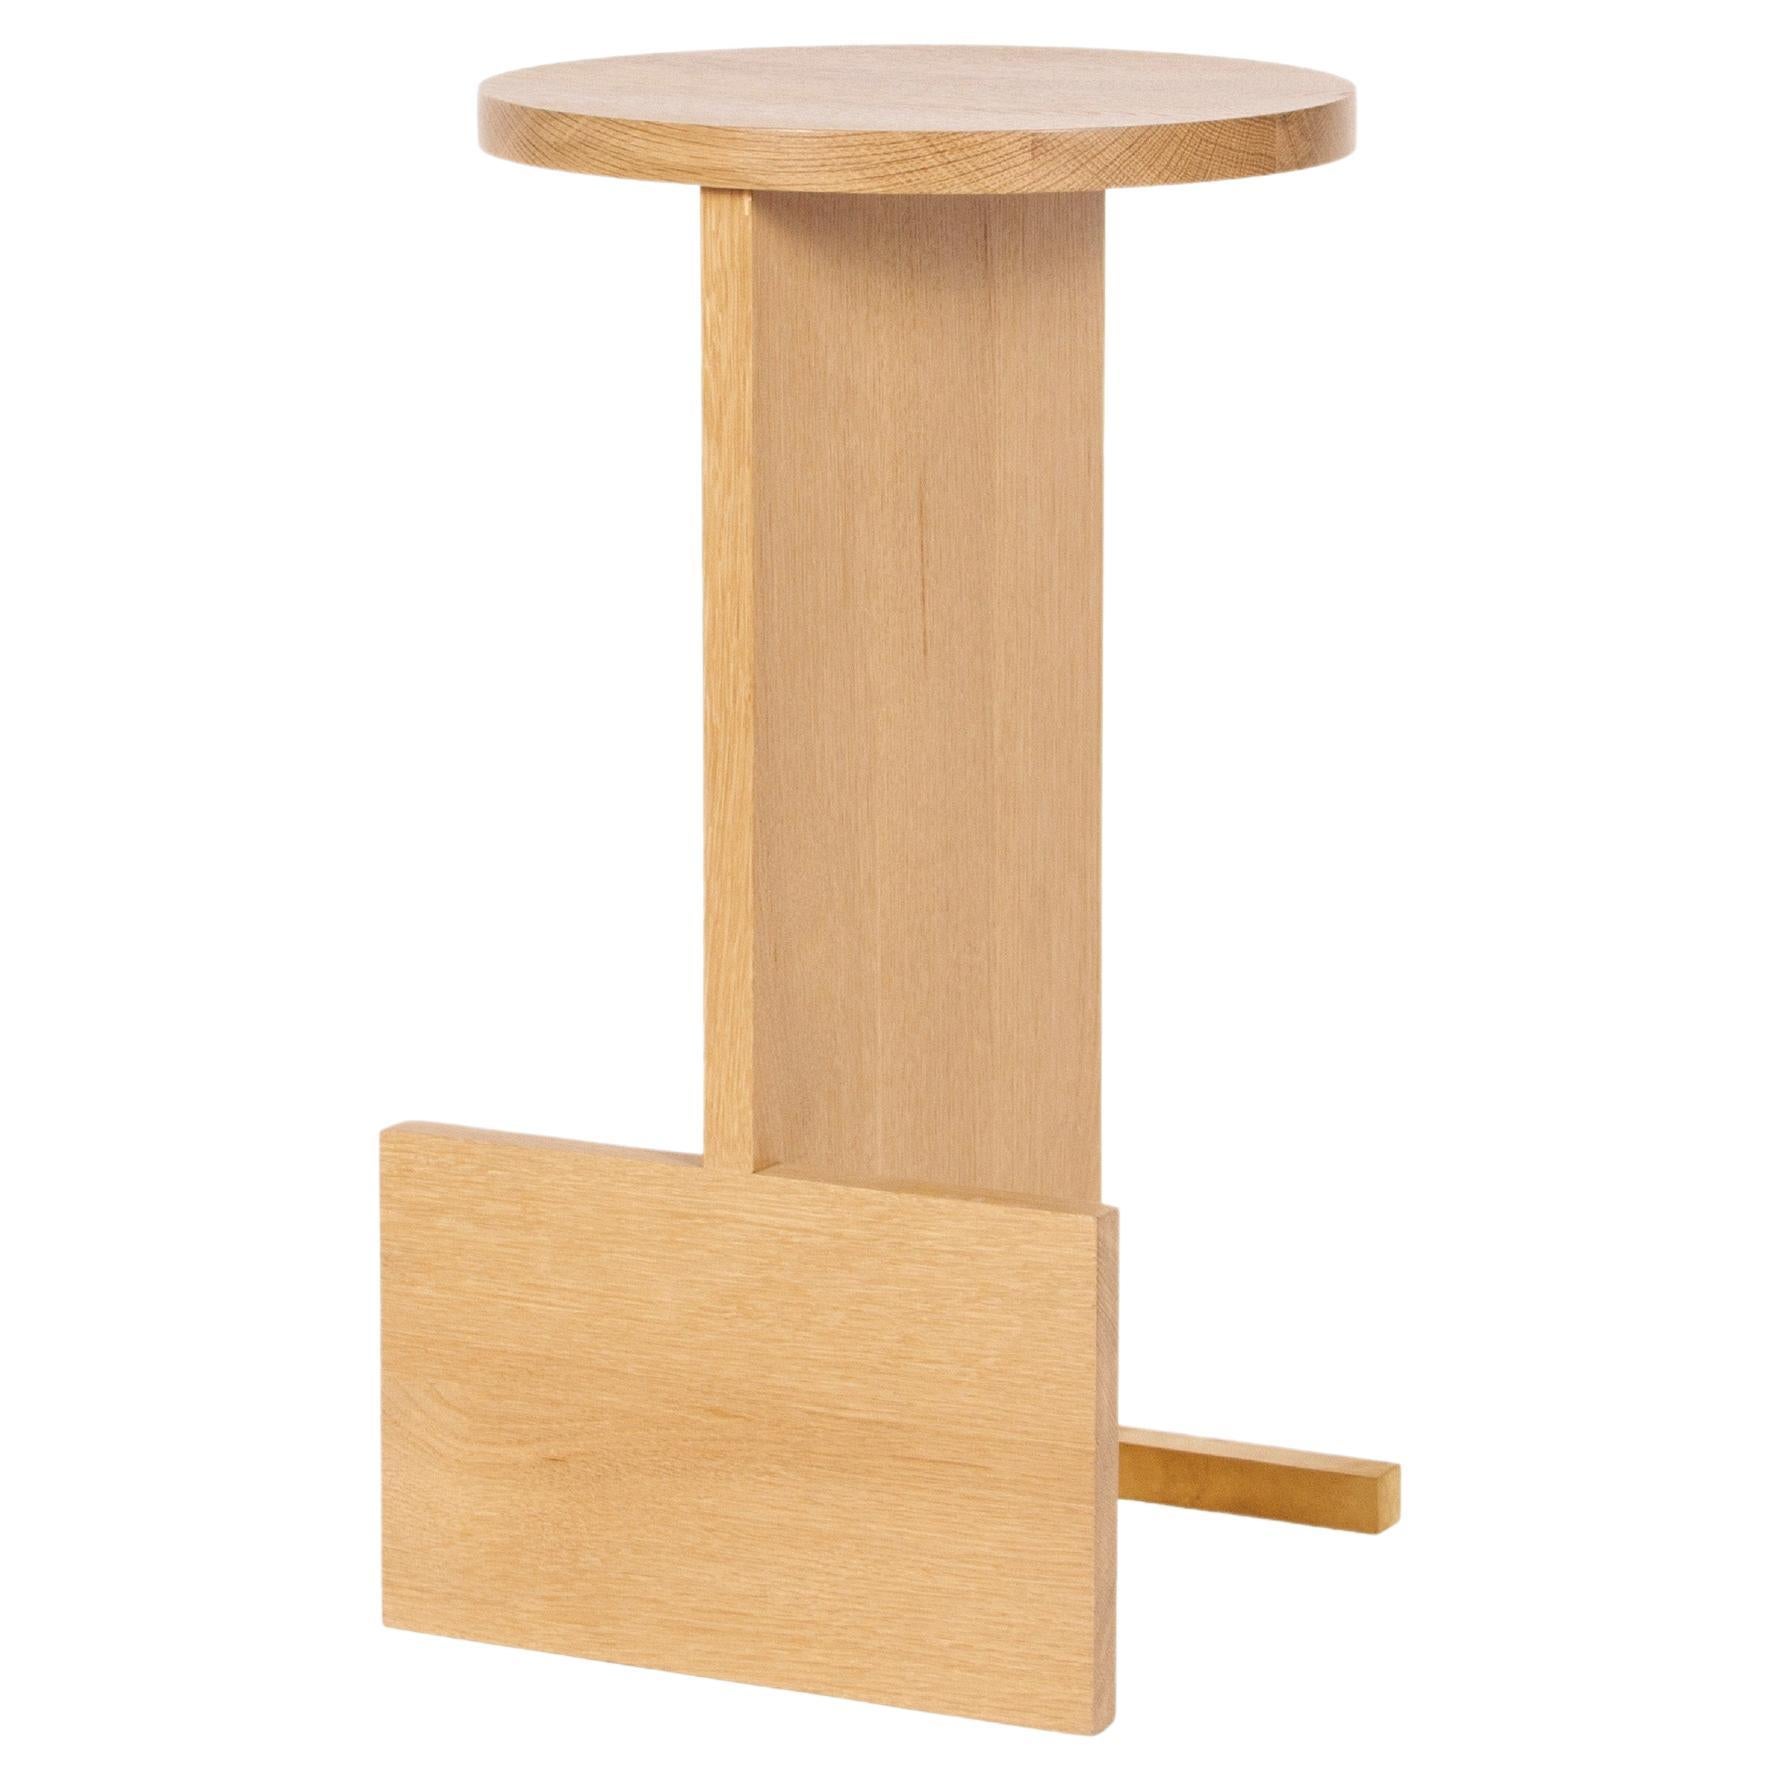 In Stock, Counter Stool in Solid White Oak and Brass by Estudio Persona